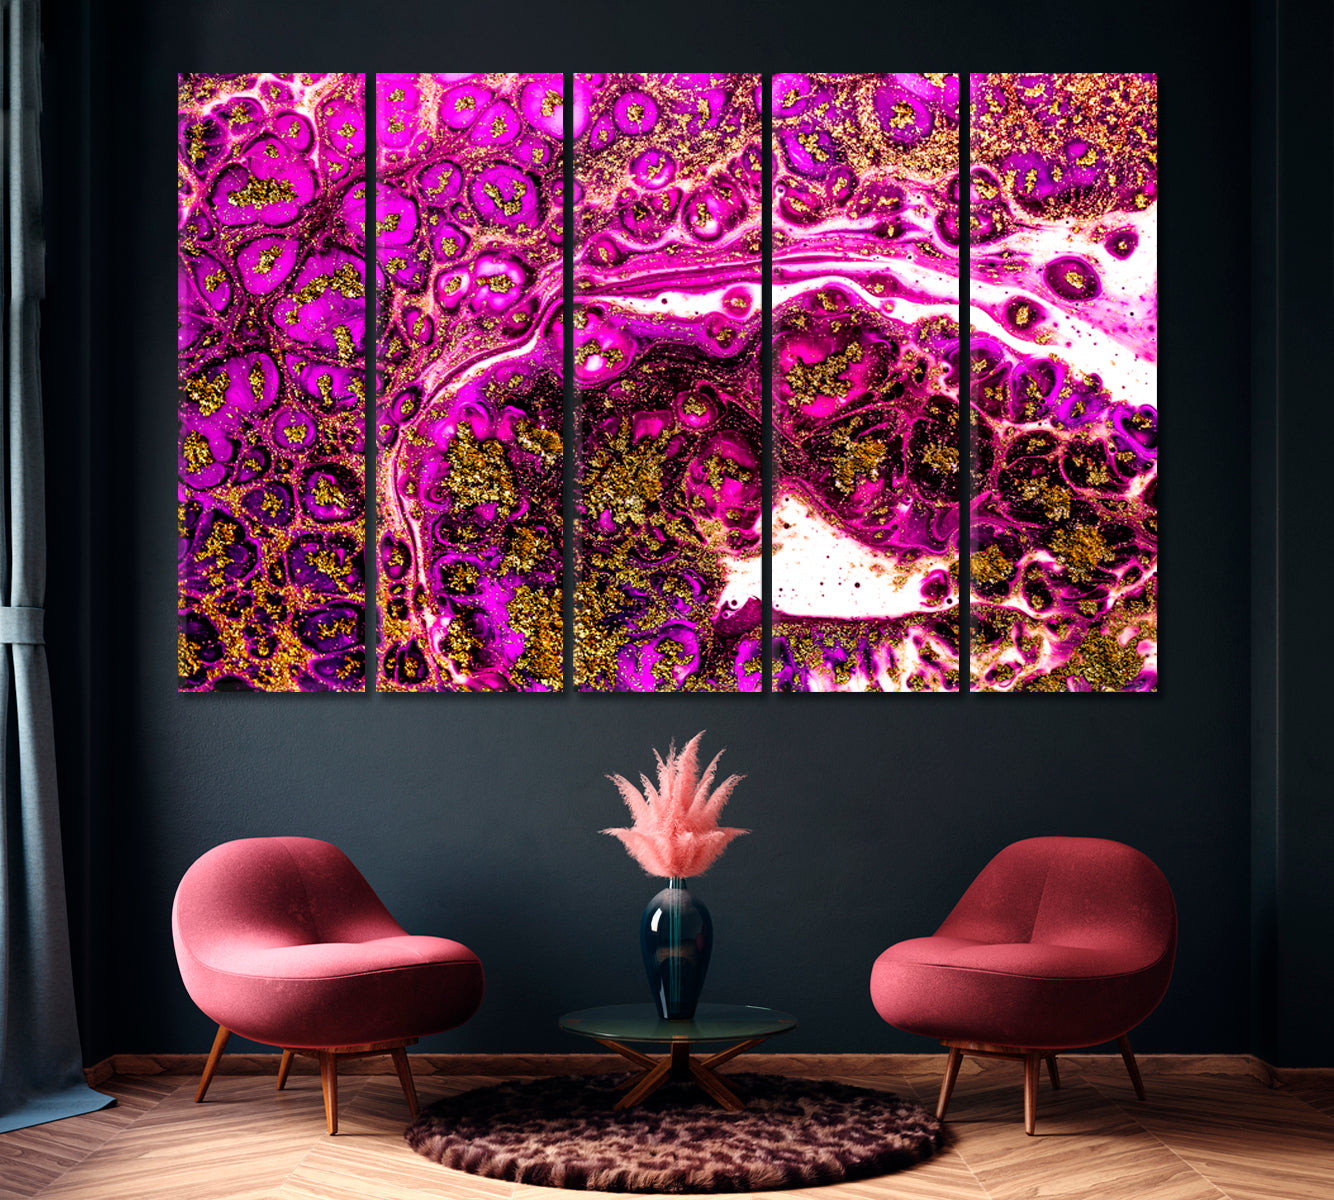 Luxury Fuchsia and Gold Painting Canvas Print ArtLexy 5 Panels 36"x24" inches 